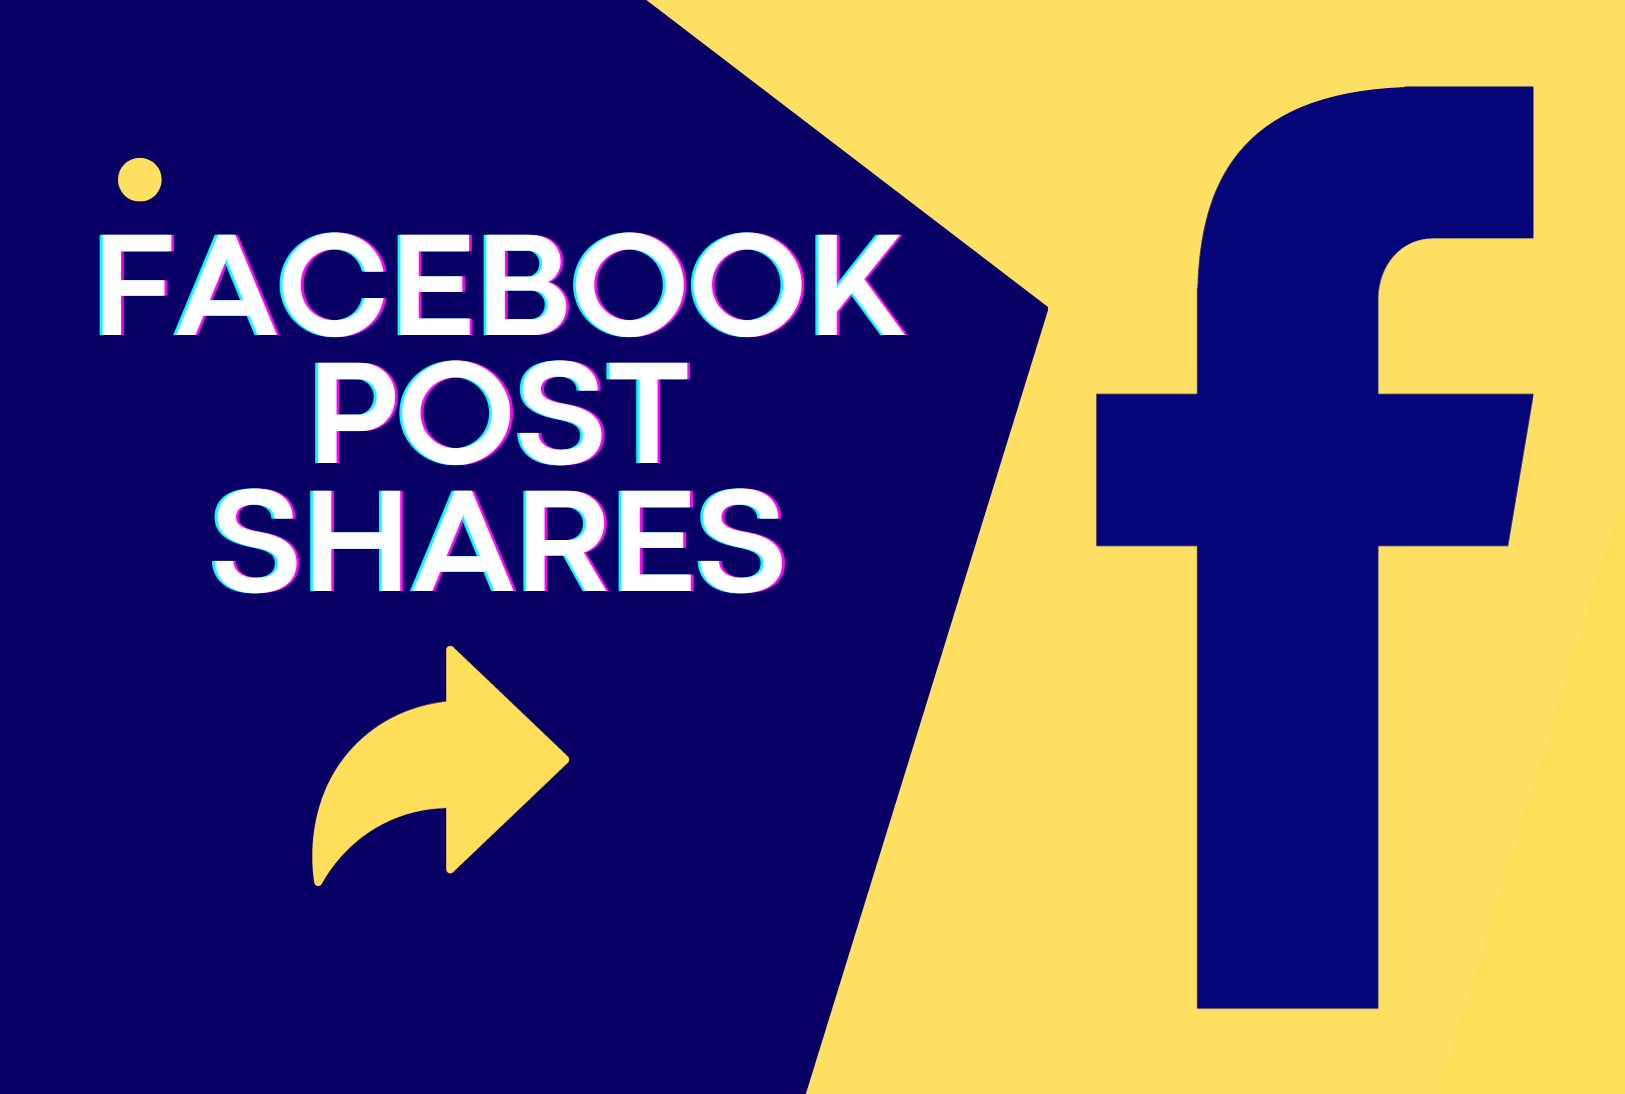 500 Facebook reposts on photos, posts, or videos, real shares